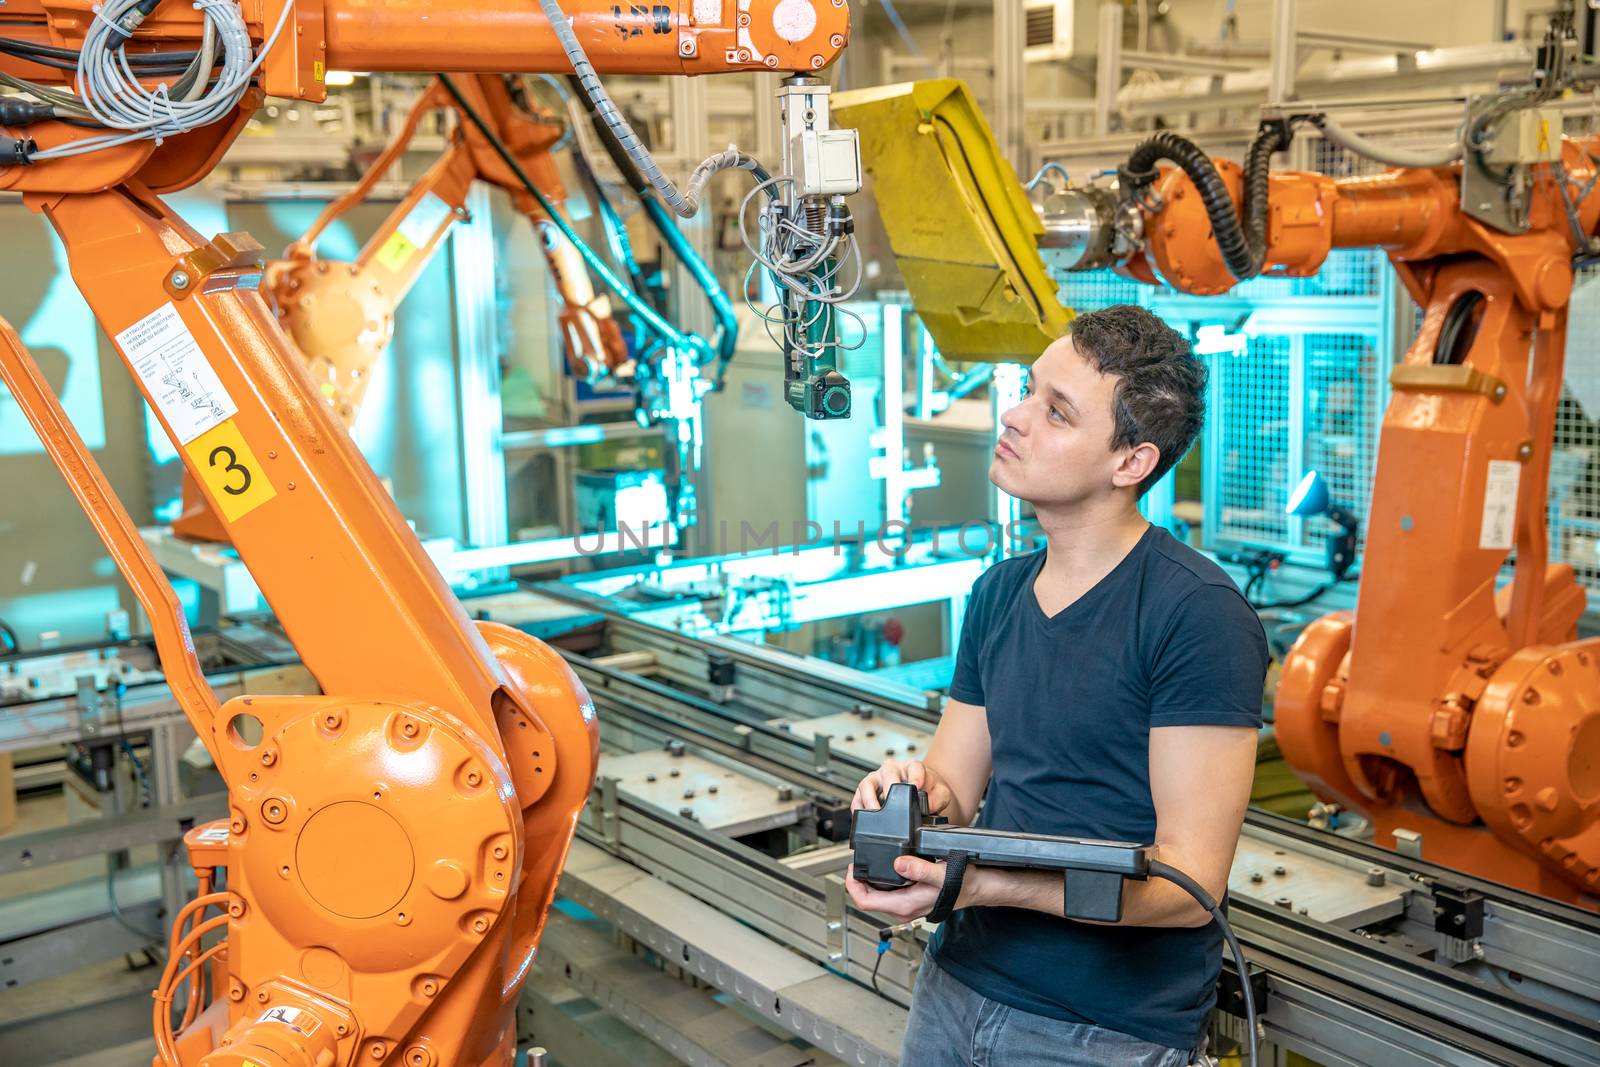 engineer controls using remote control of industrial robot in factory. Automatic welding and gluing using automation and robotic arms by Edophoto